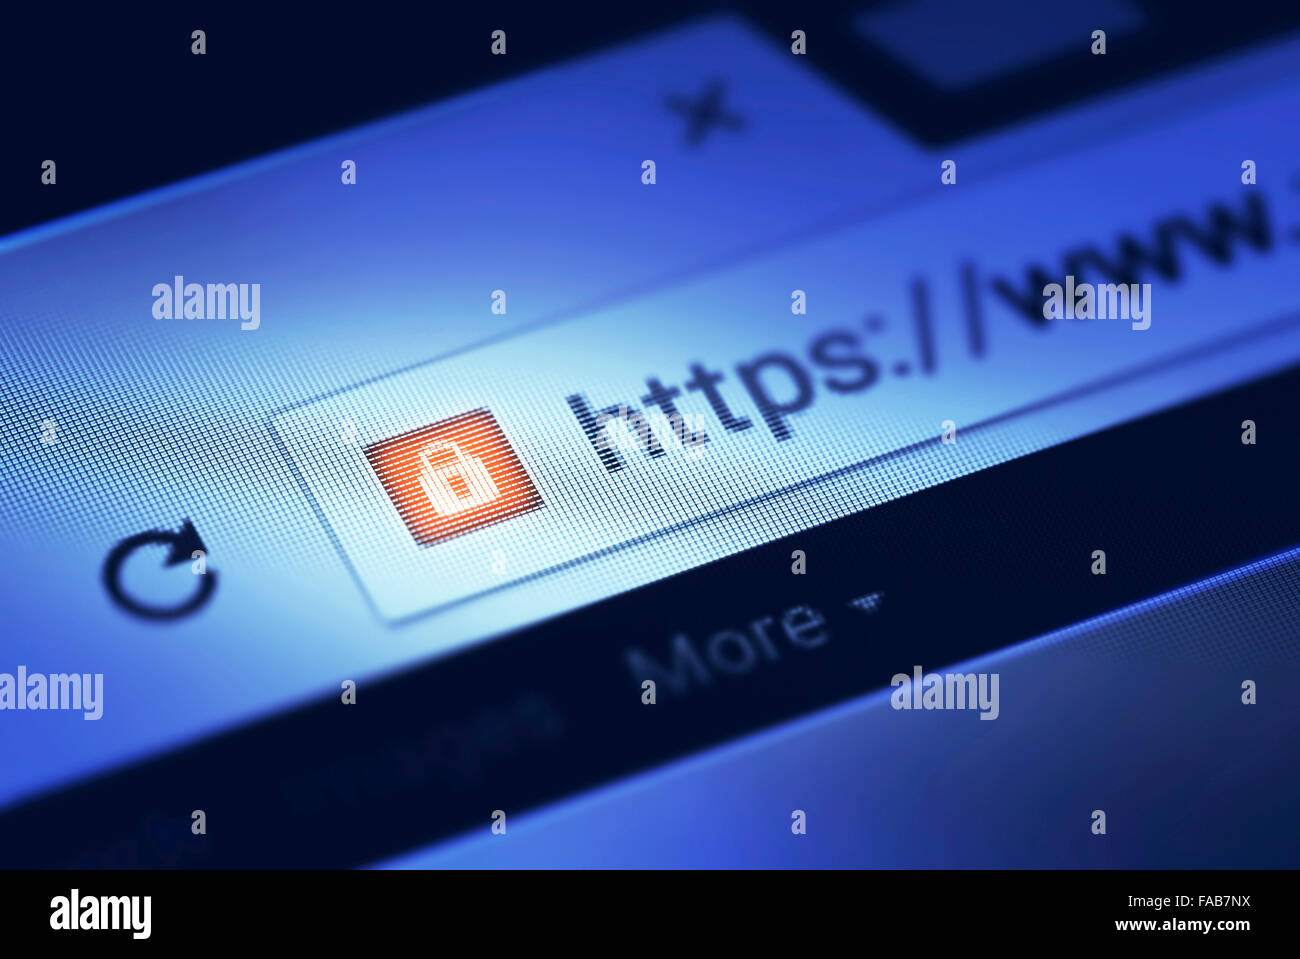 Https (hyper text transfer protocol secure) on an internet search bar. Stock Photo